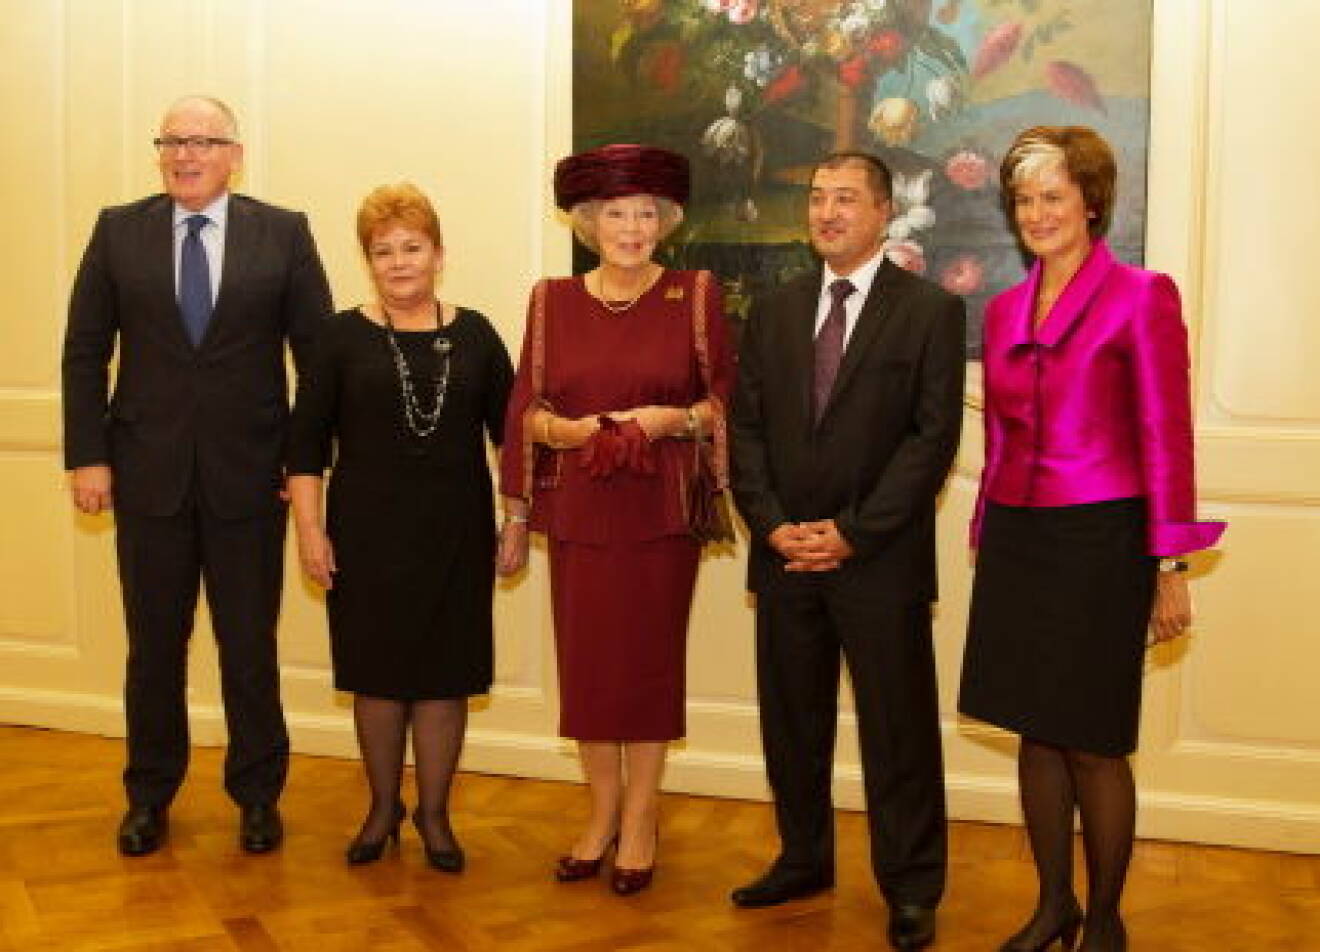 HRH Princess Beatrix attends at the Spaansche Hof in The Hague, the ceremony at the Max van der Stoel Award. The award goes to Spravedlivost, a human rights NGO in Kyrgyzstan.